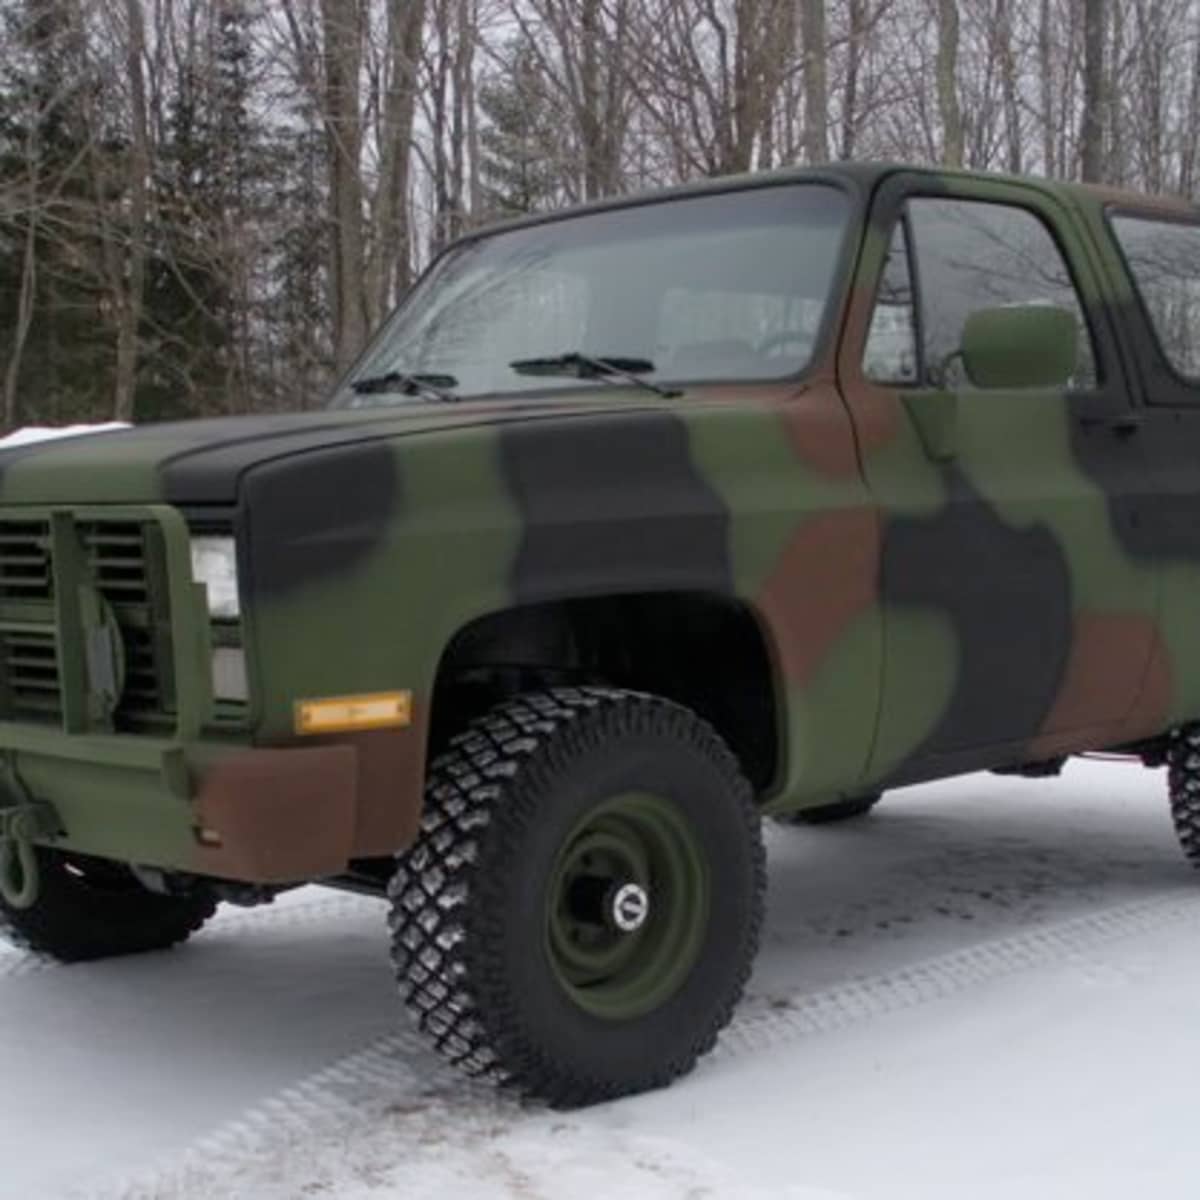 cling Ruby Approval The M1009 CUCV: A Manly, Eco-Conscious, Military-Rejected, Survivalist's  Dream Vehicle - AxleAddict